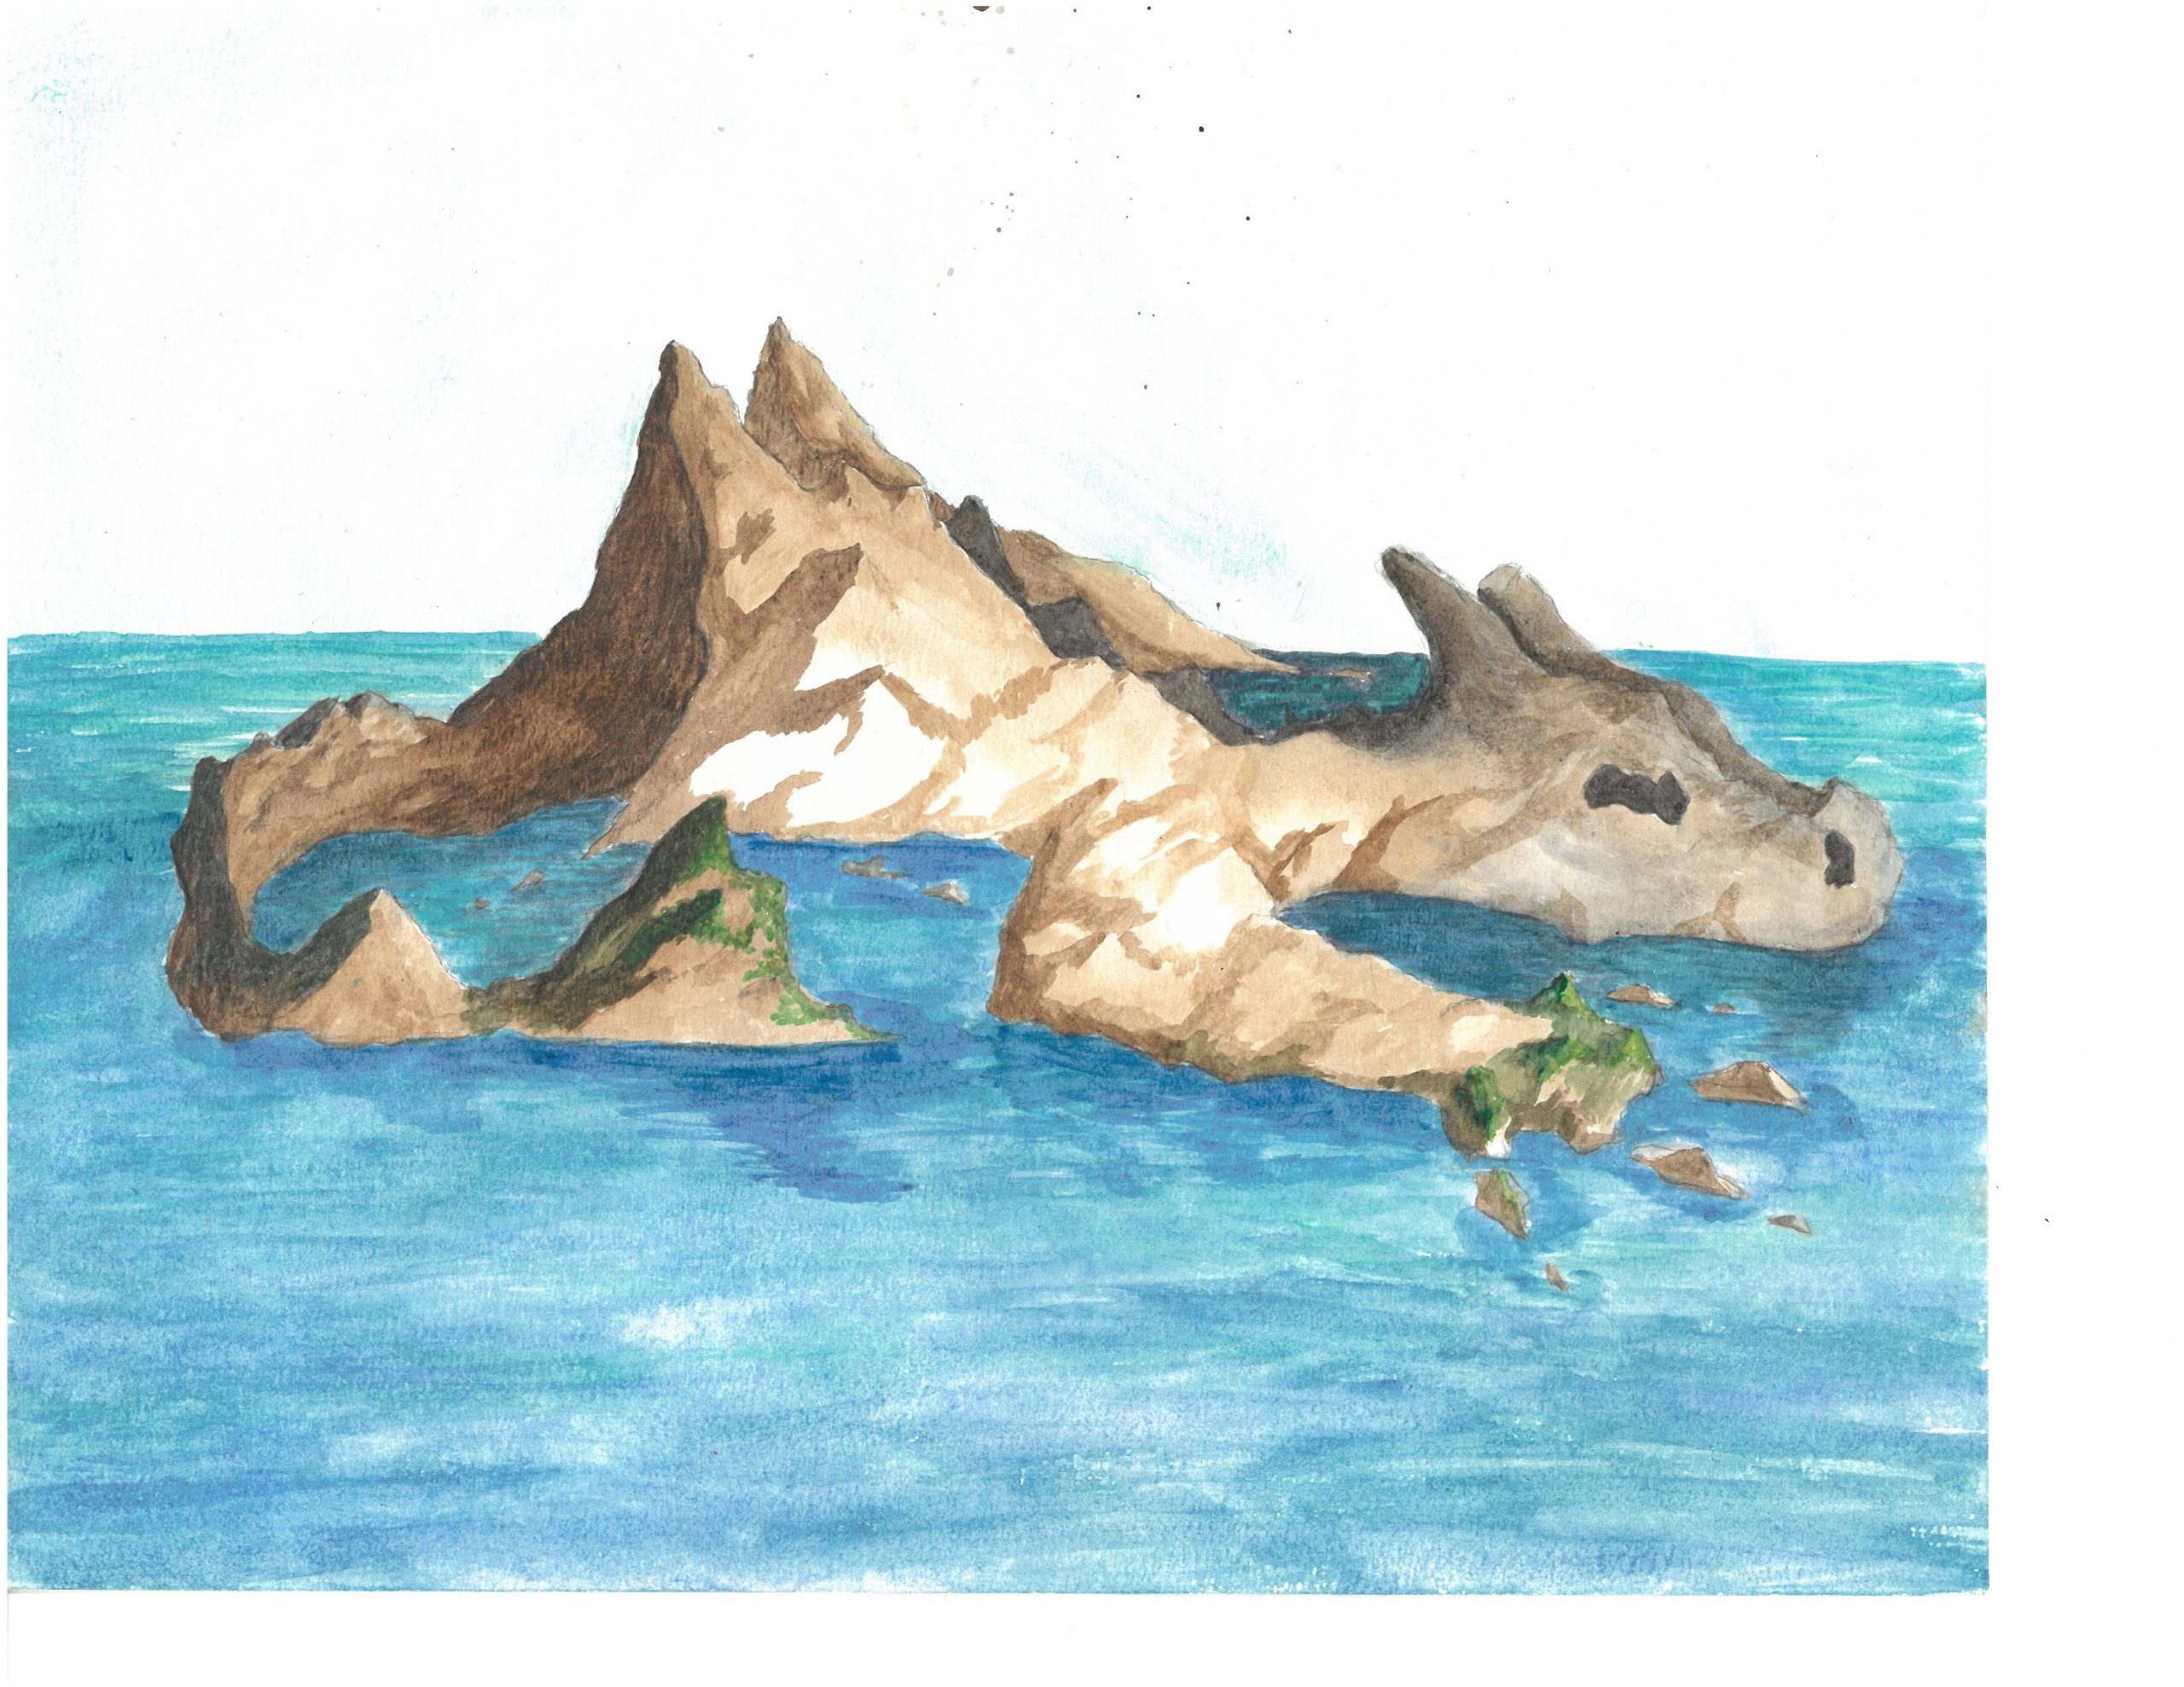 A goat-shaped mountain in the middle of sea